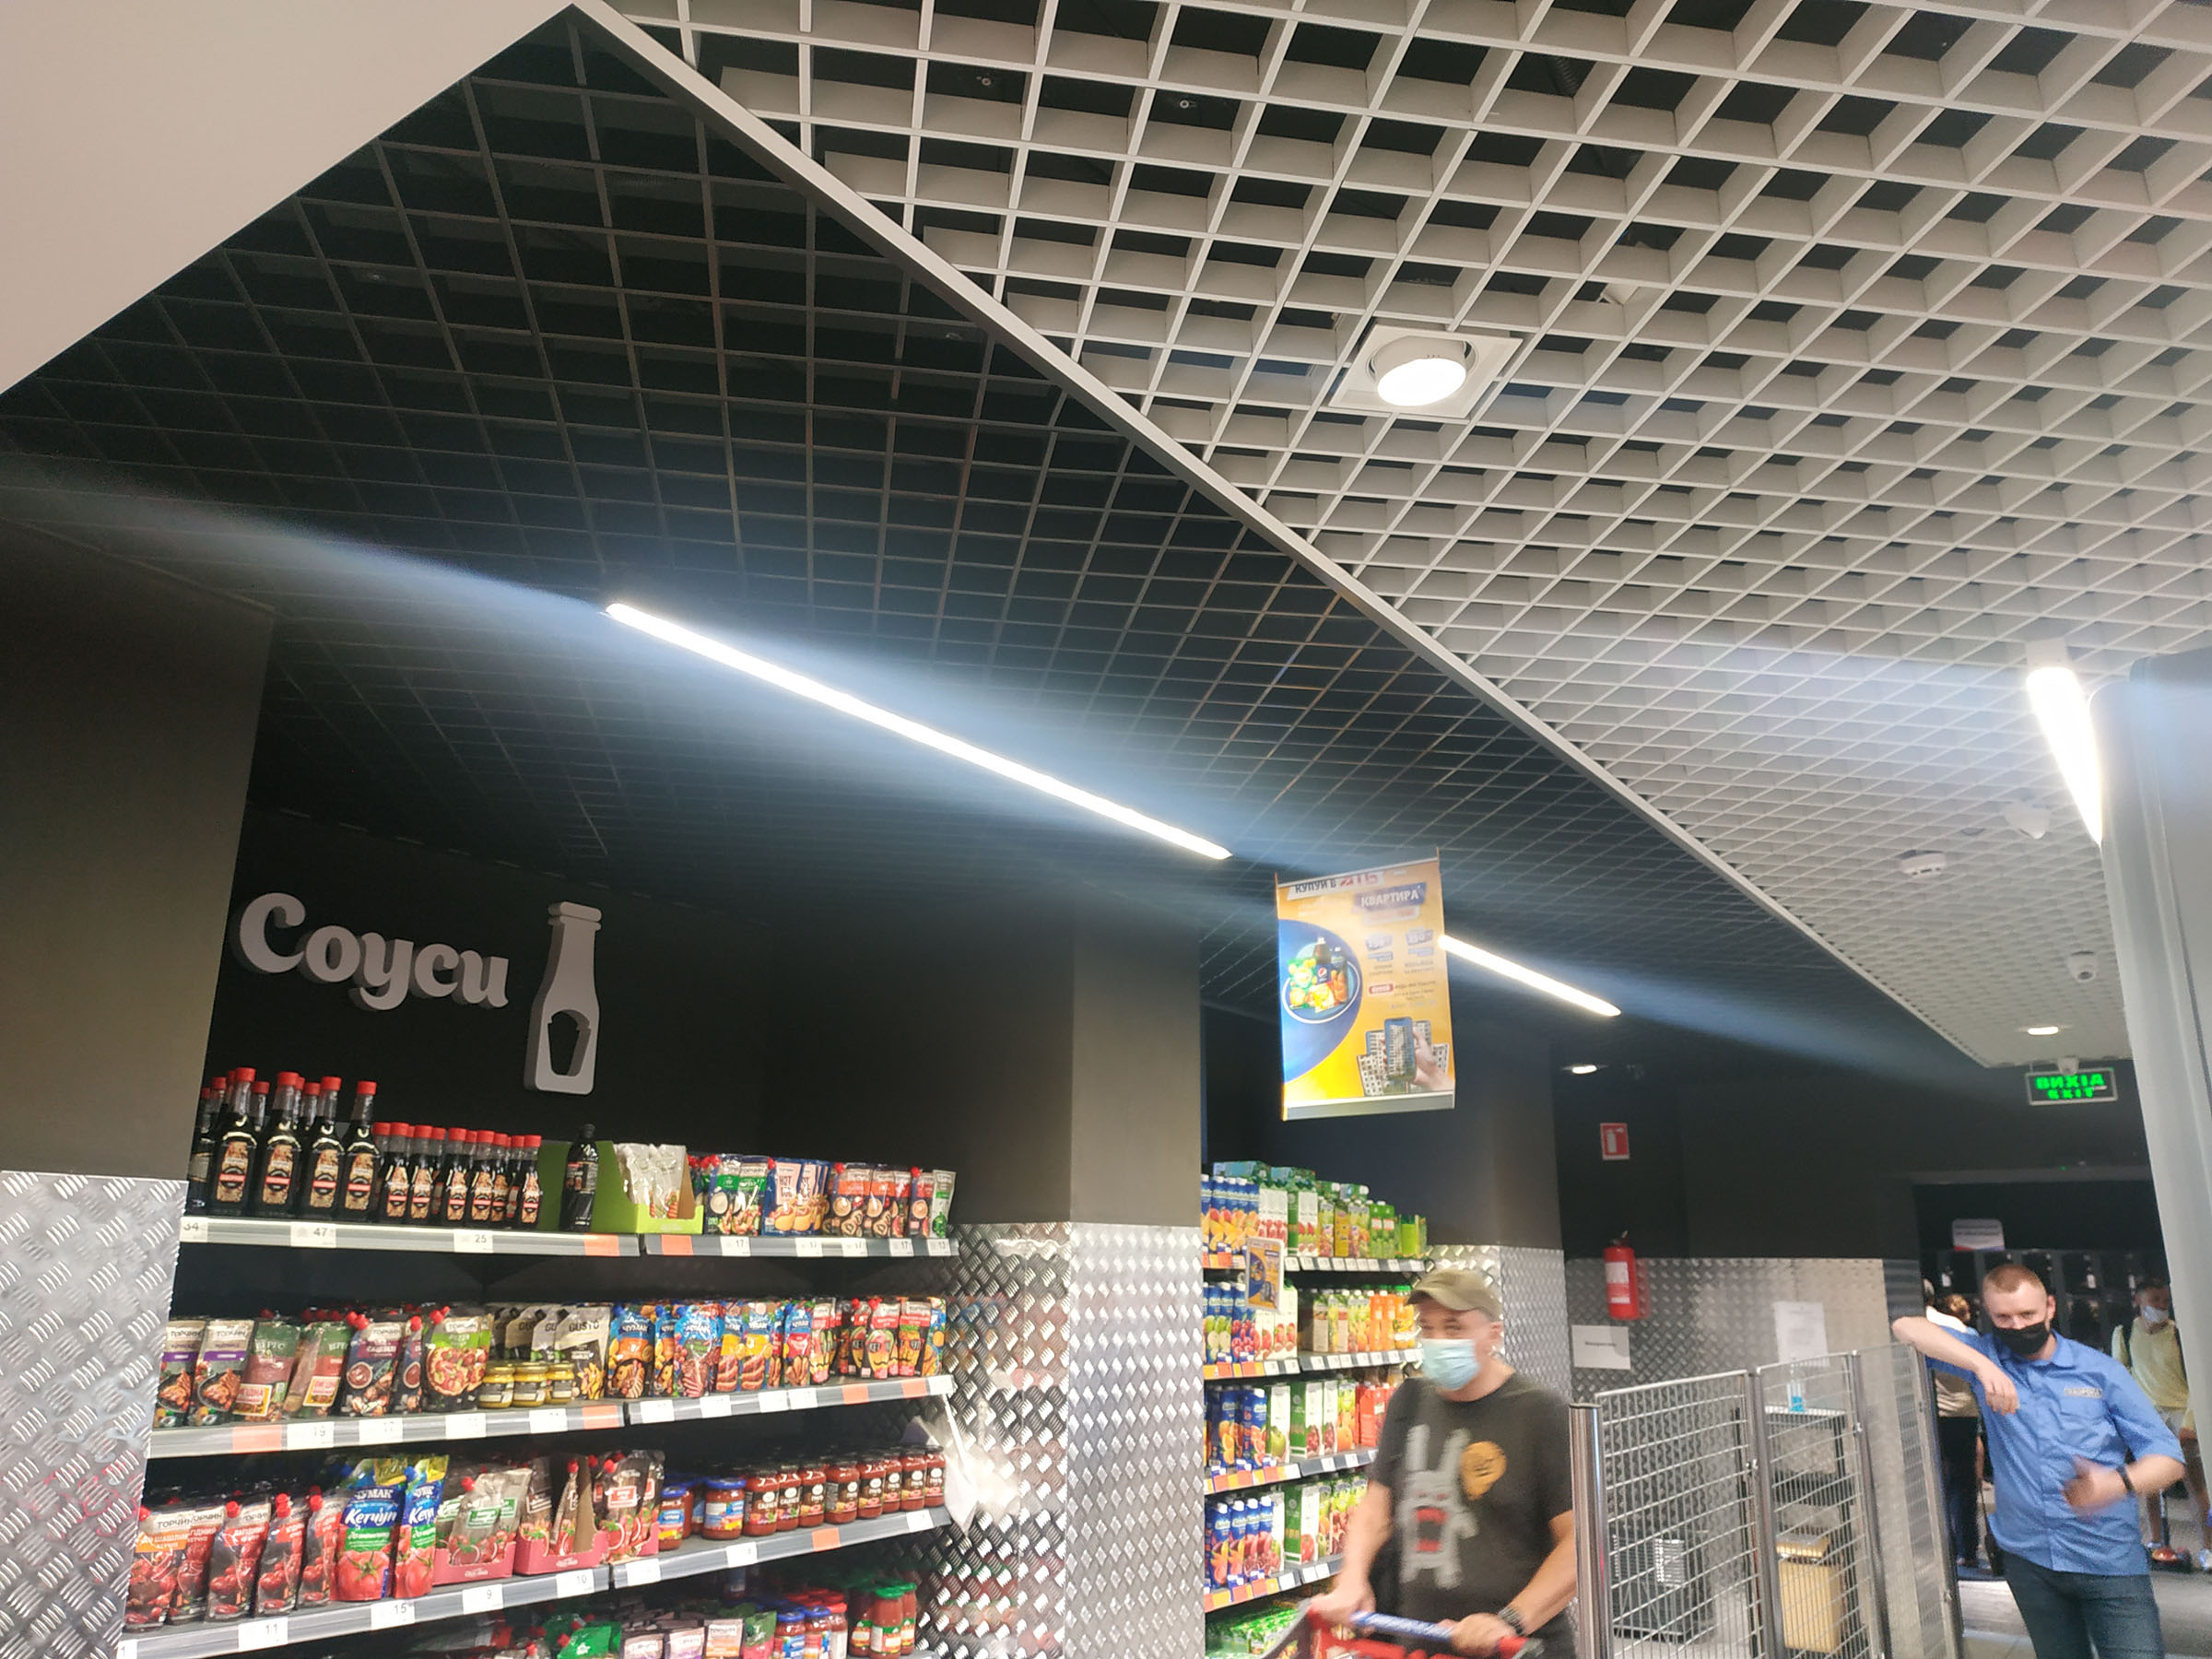 Open cell suspended ceiling grilyato Kraft in stores and shopping centers 6